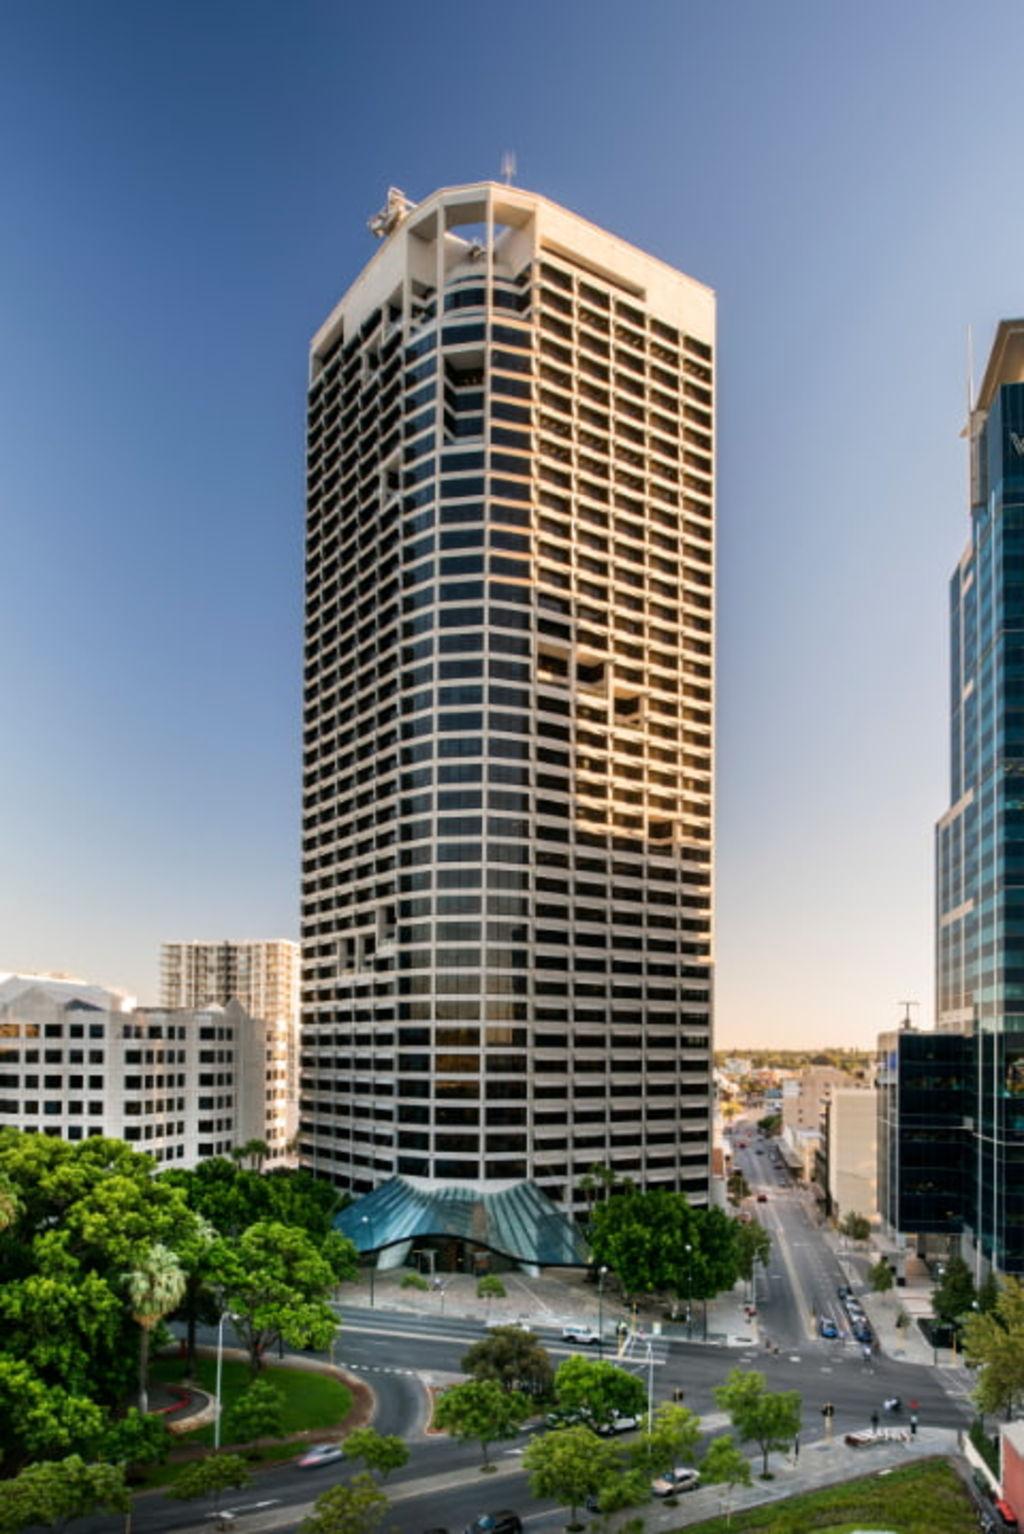 So_regonsiable_as_a_work_by_Harry_Seidler_is_Perth_s_QV1_Tower._Image_QV1_n4dzdi